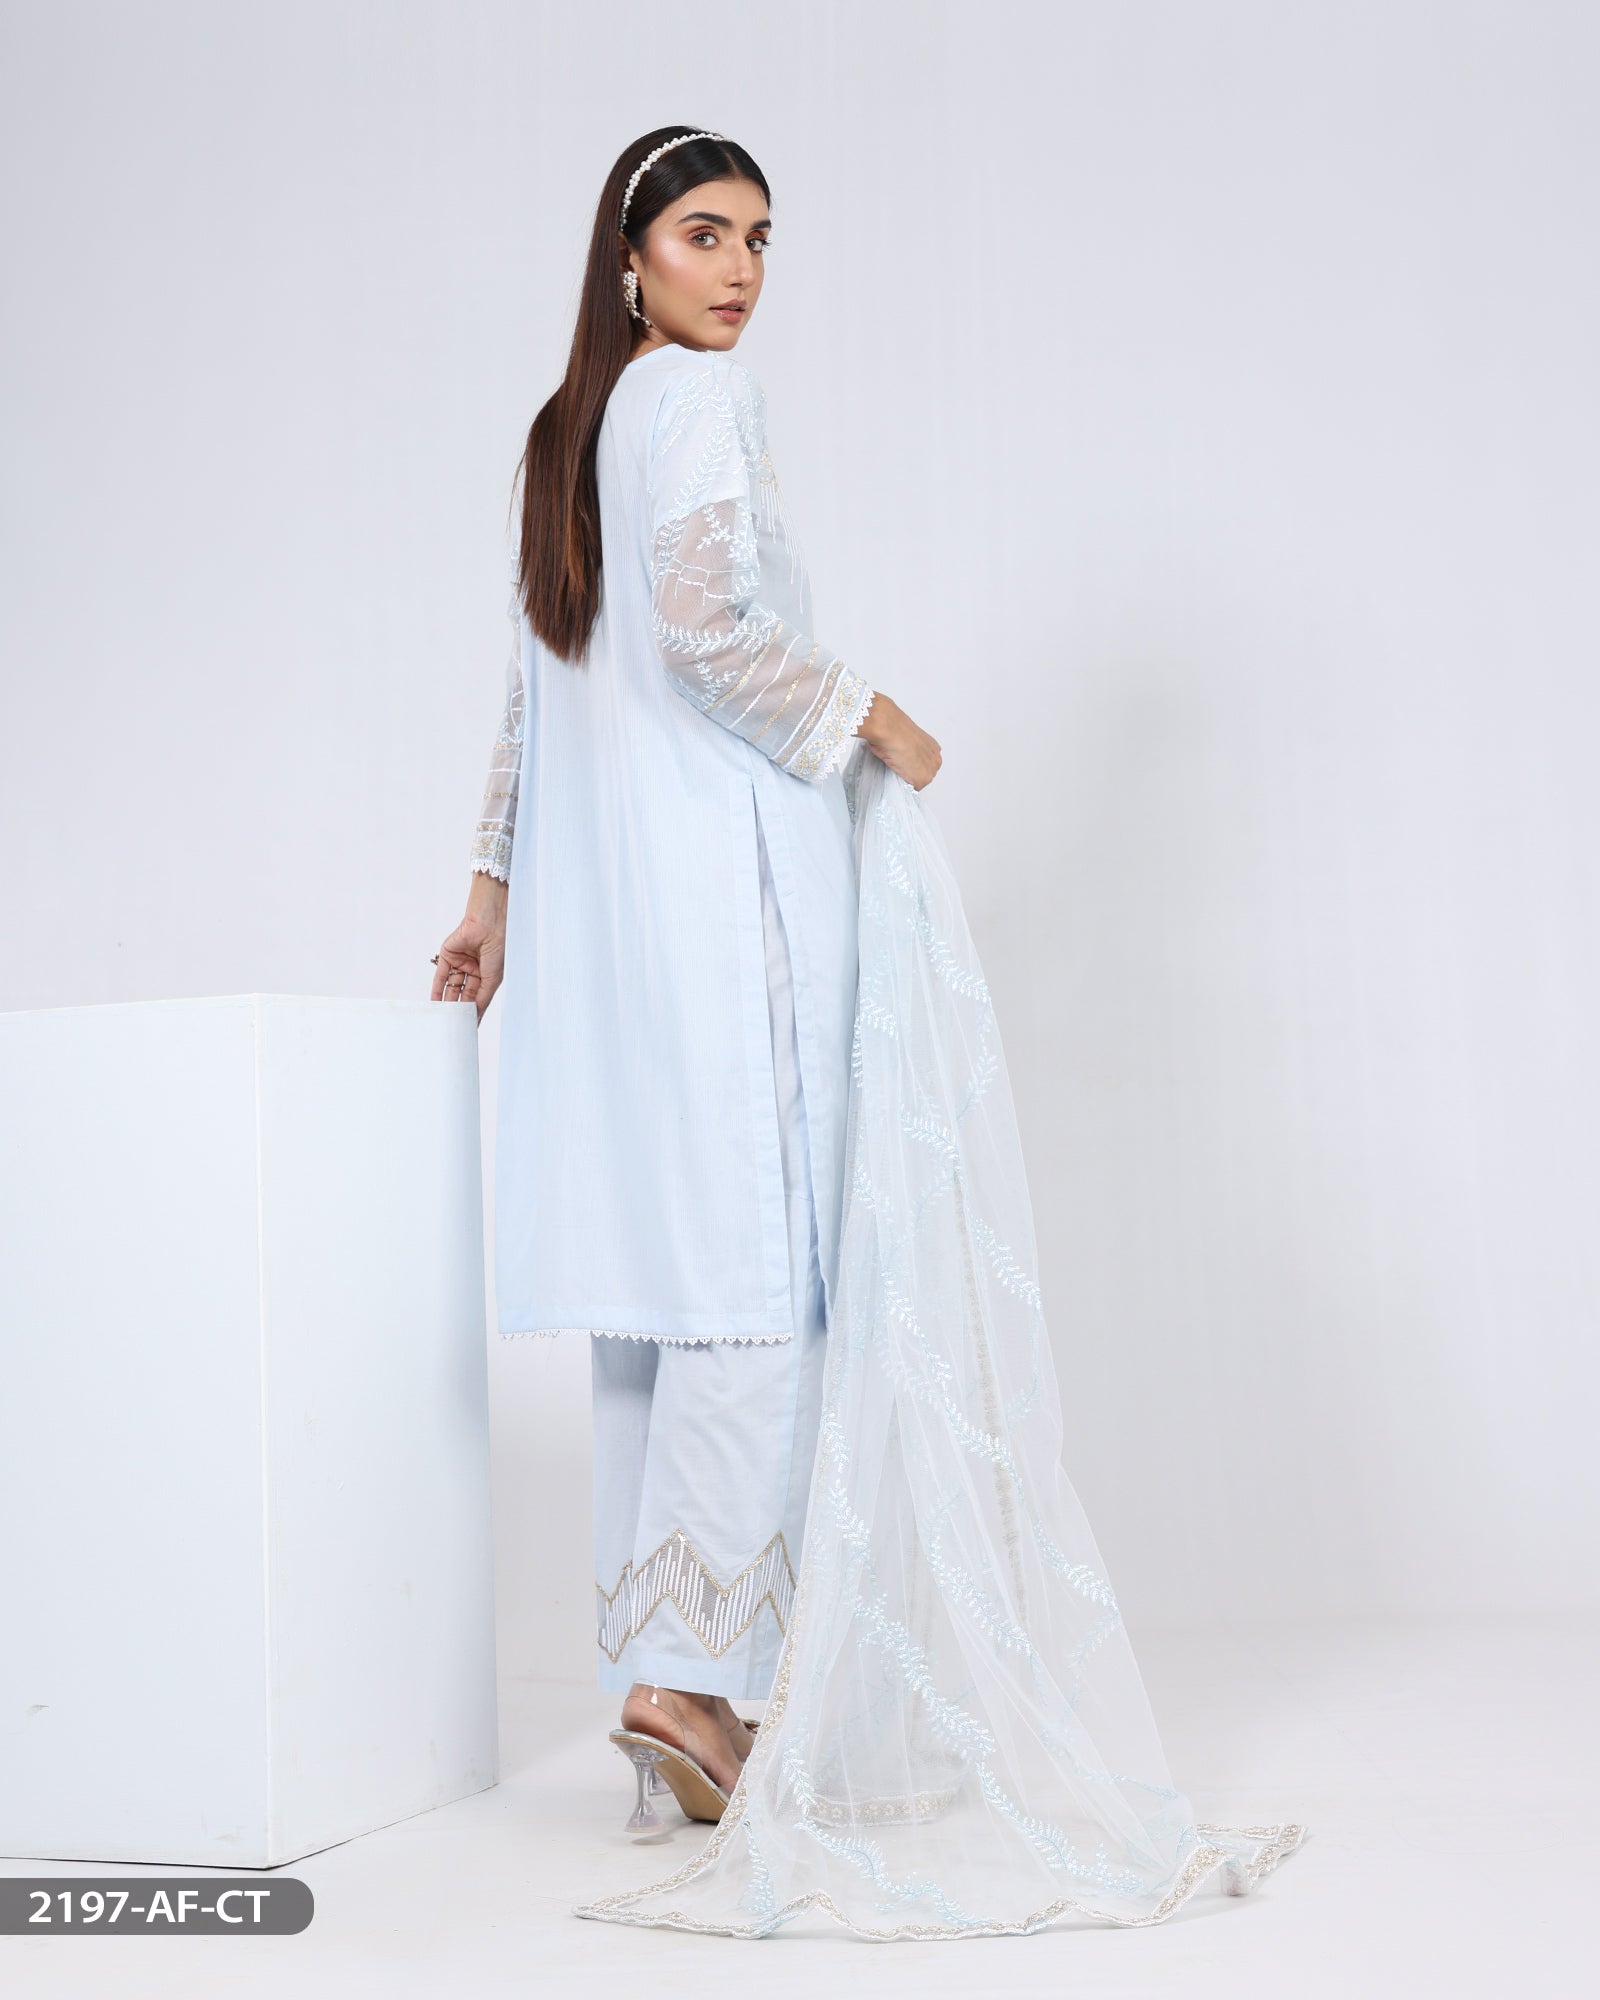 Stitched 3 Piece Cotton Embroidered Suit